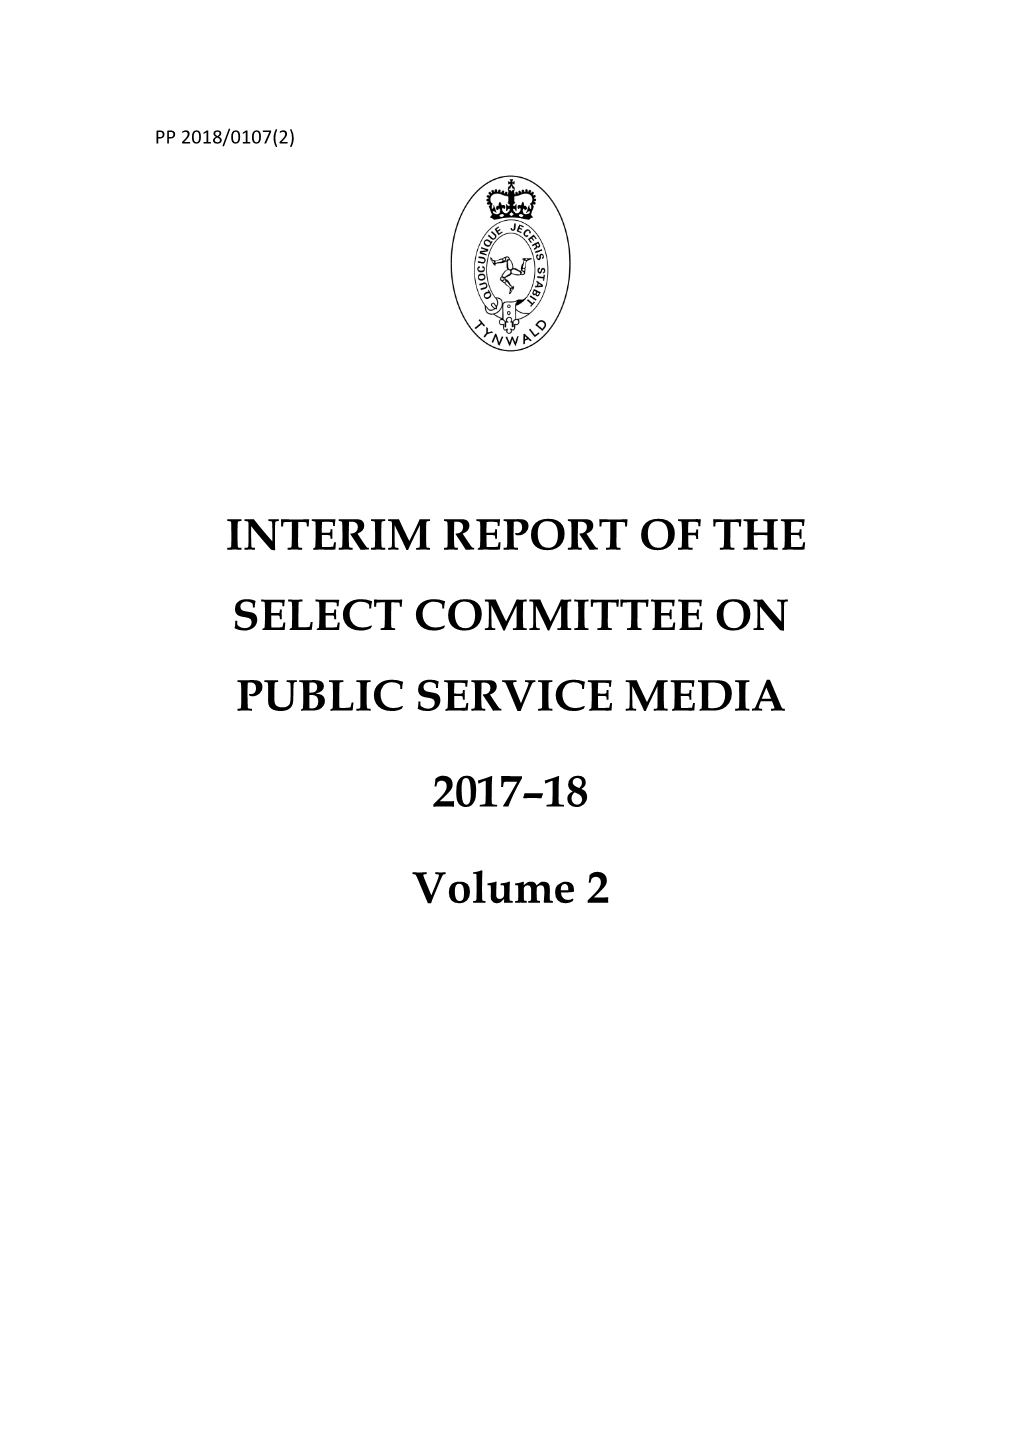 Interim Report of the Select Committee on Public Service Media